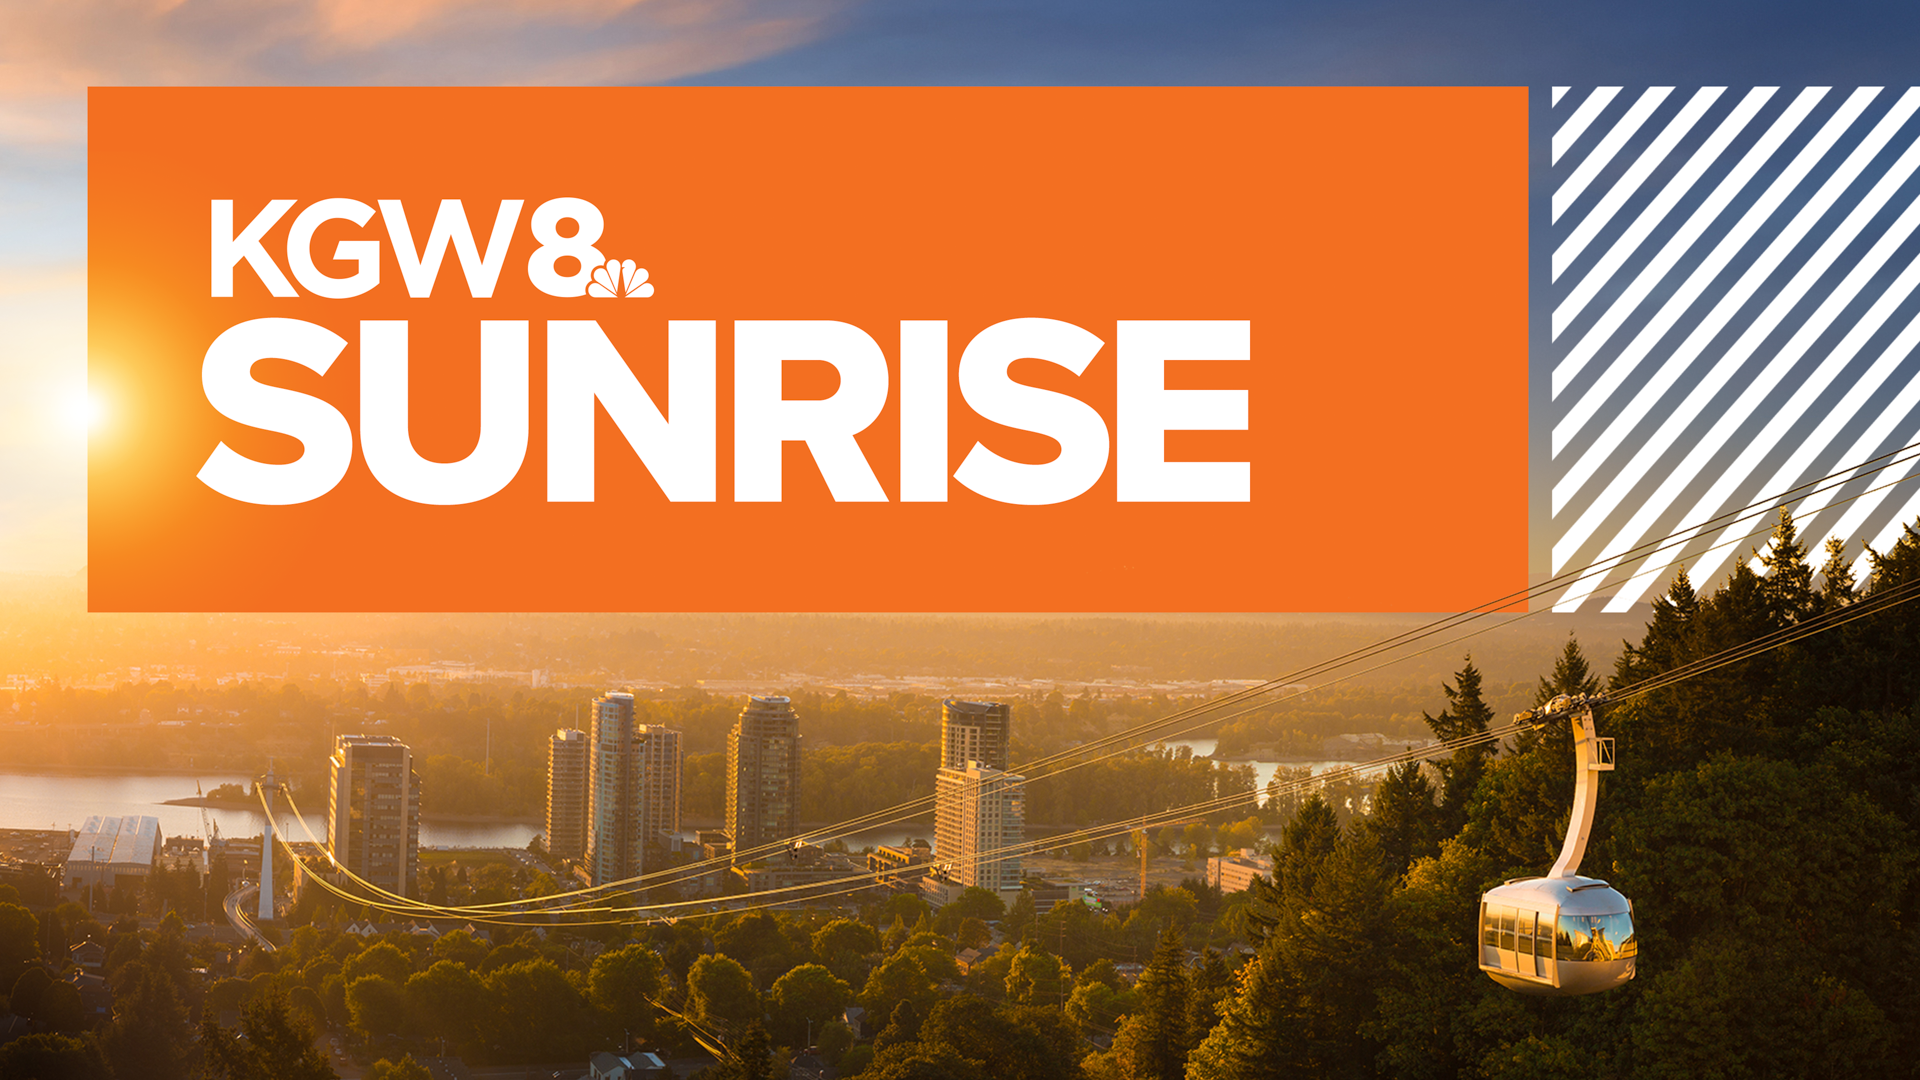 KGW Top Stories: Sunrise, Sunday, August. 7, 2022